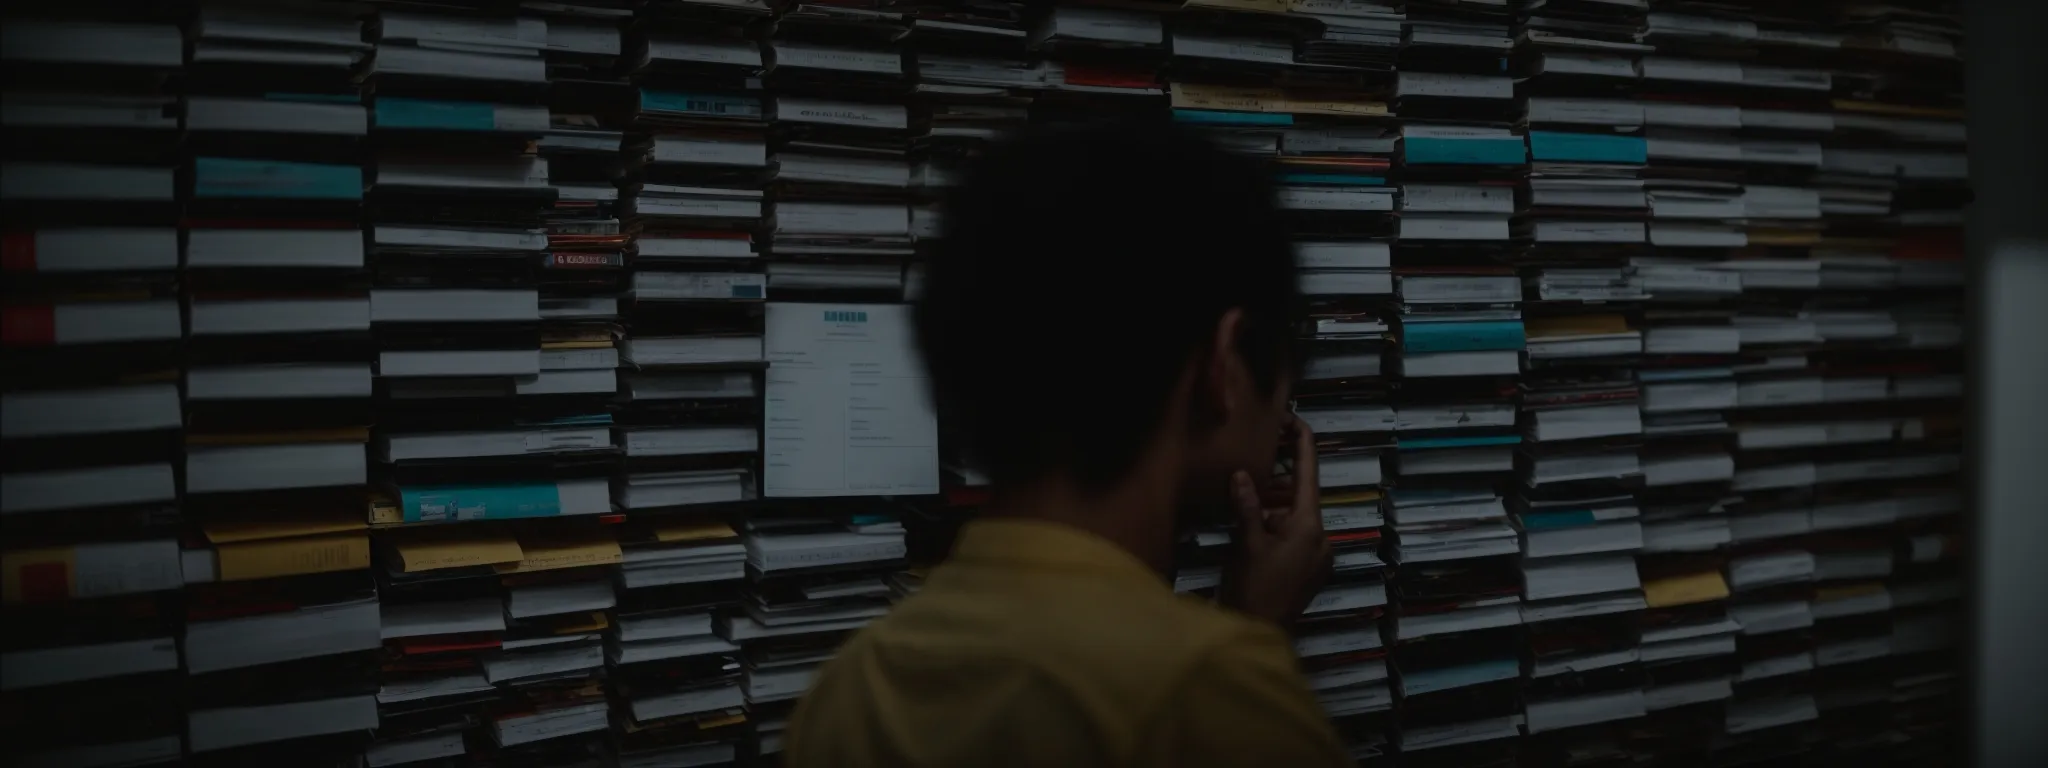 a person ponders over a collection of file folders representing directories with a computer screen in the background showing a search engine's home page.